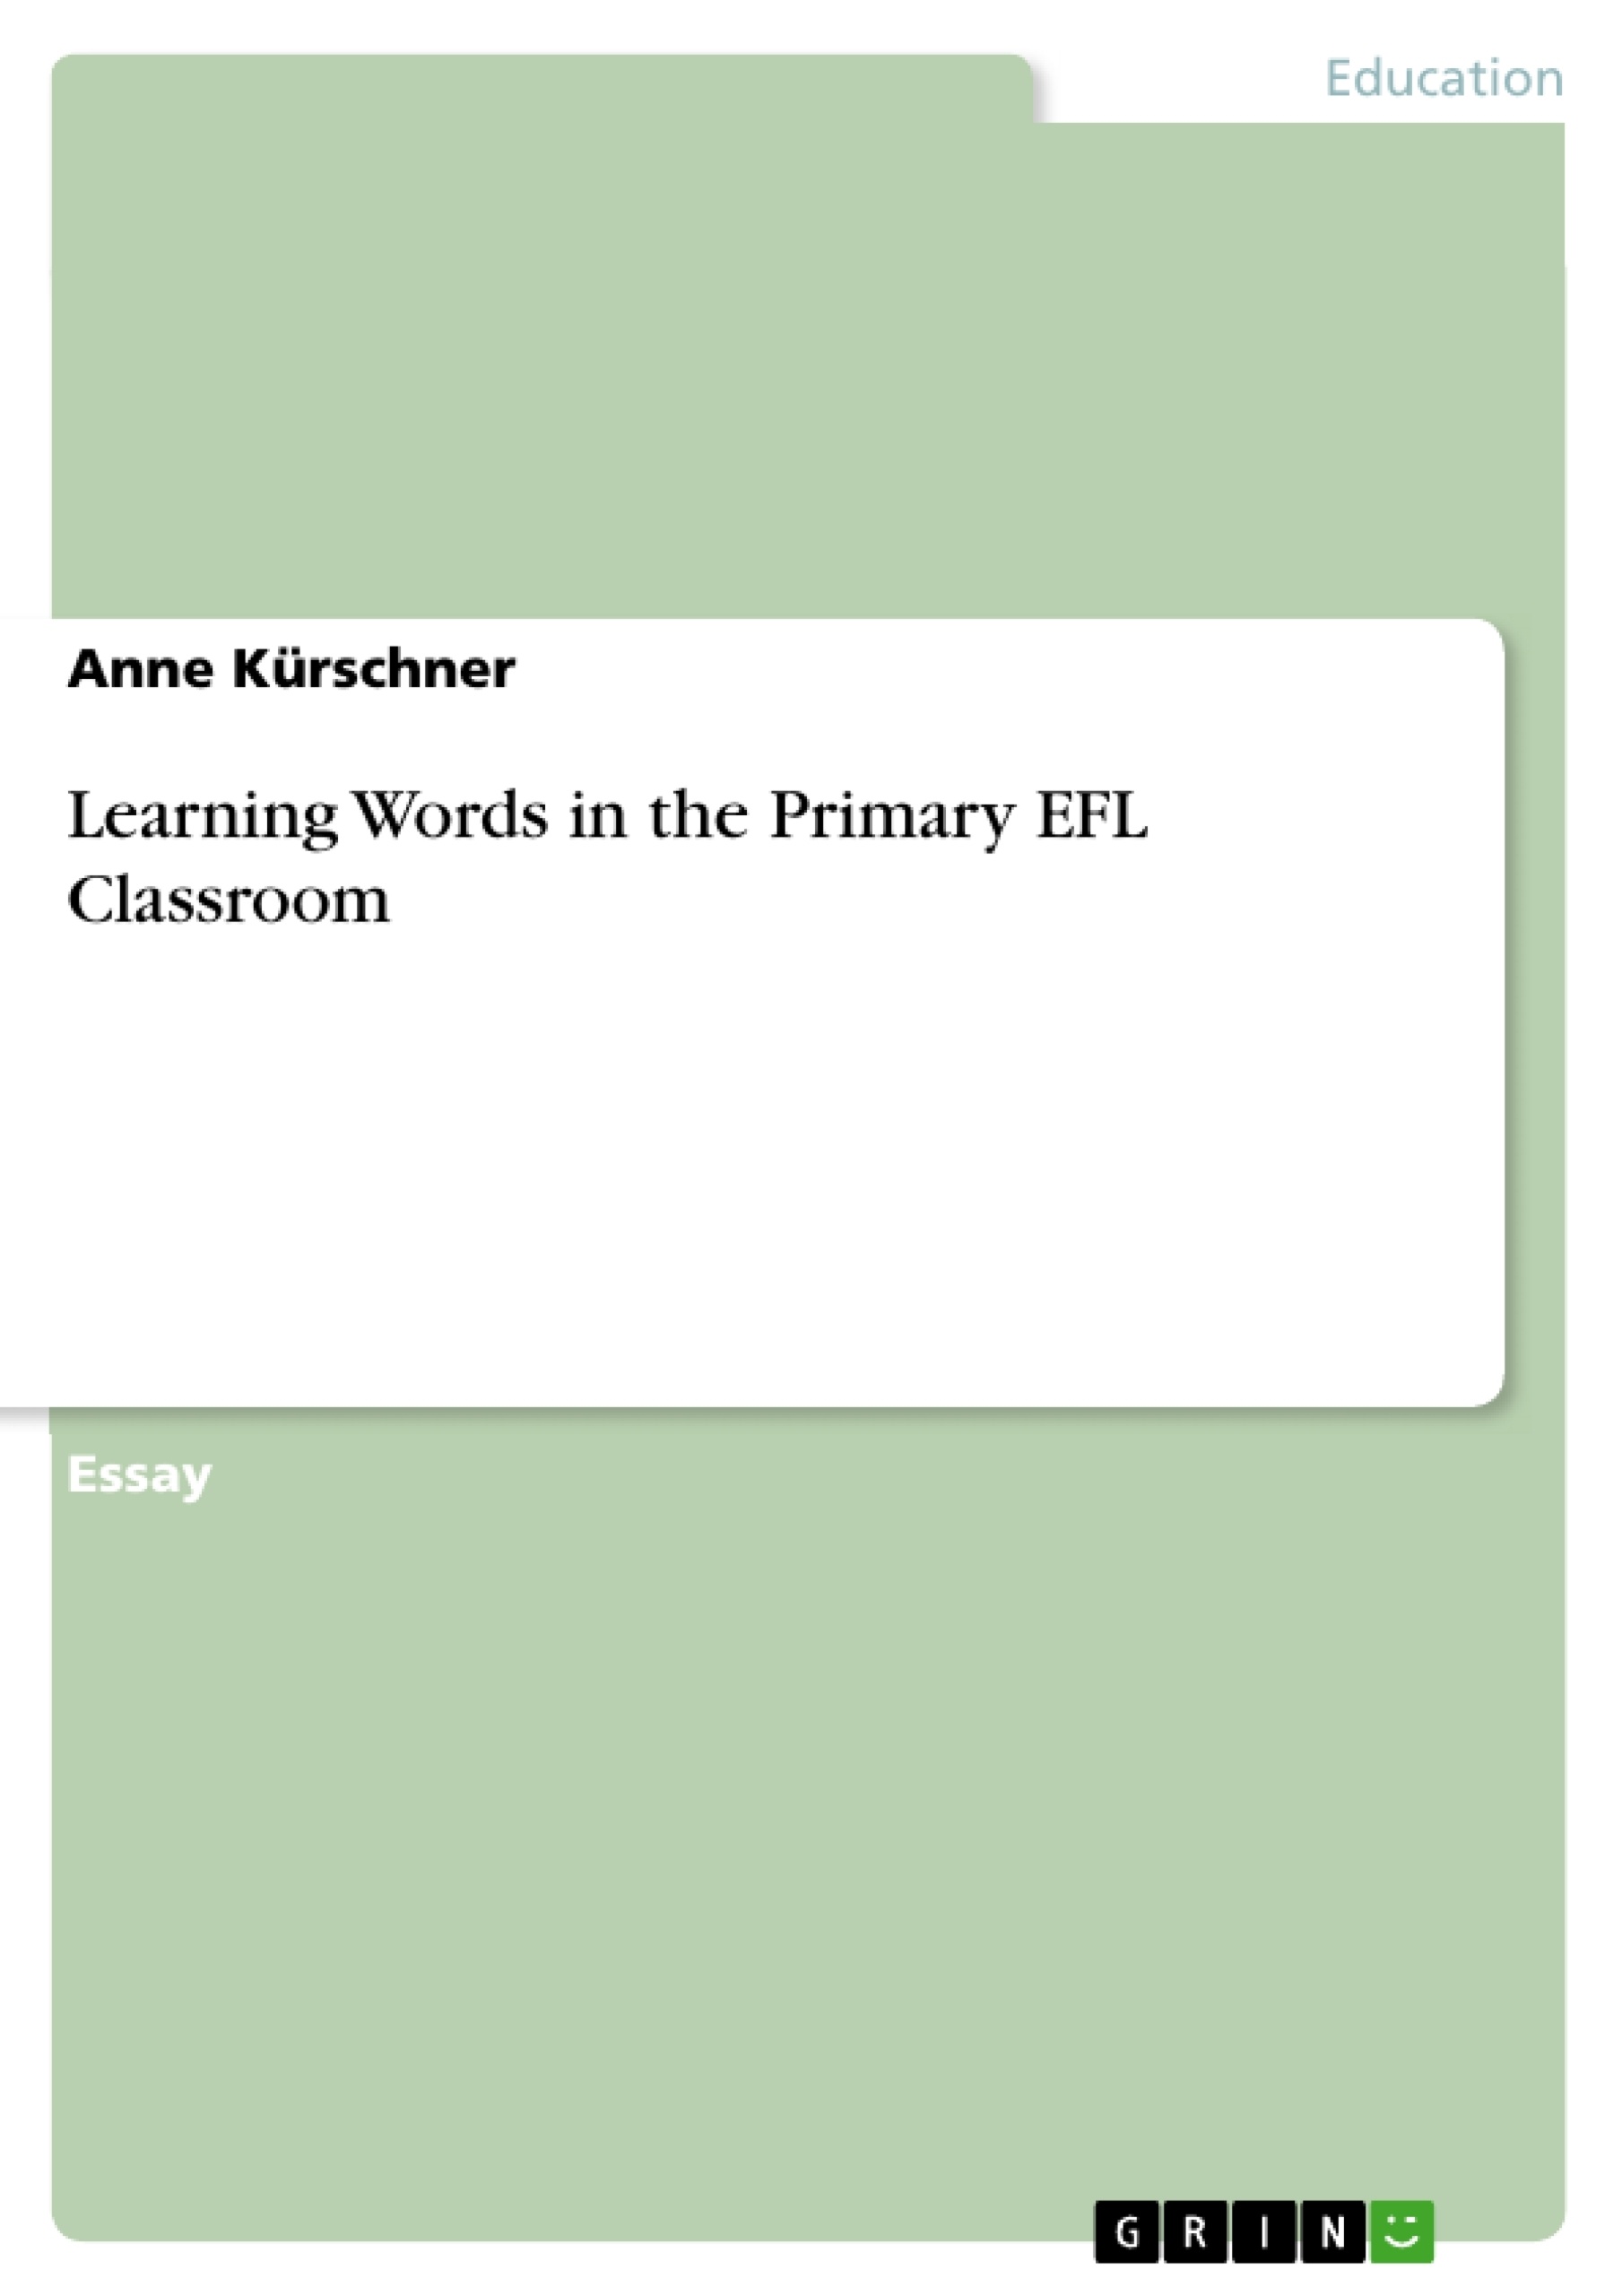 Title: Learning Words in the Primary EFL Classroom